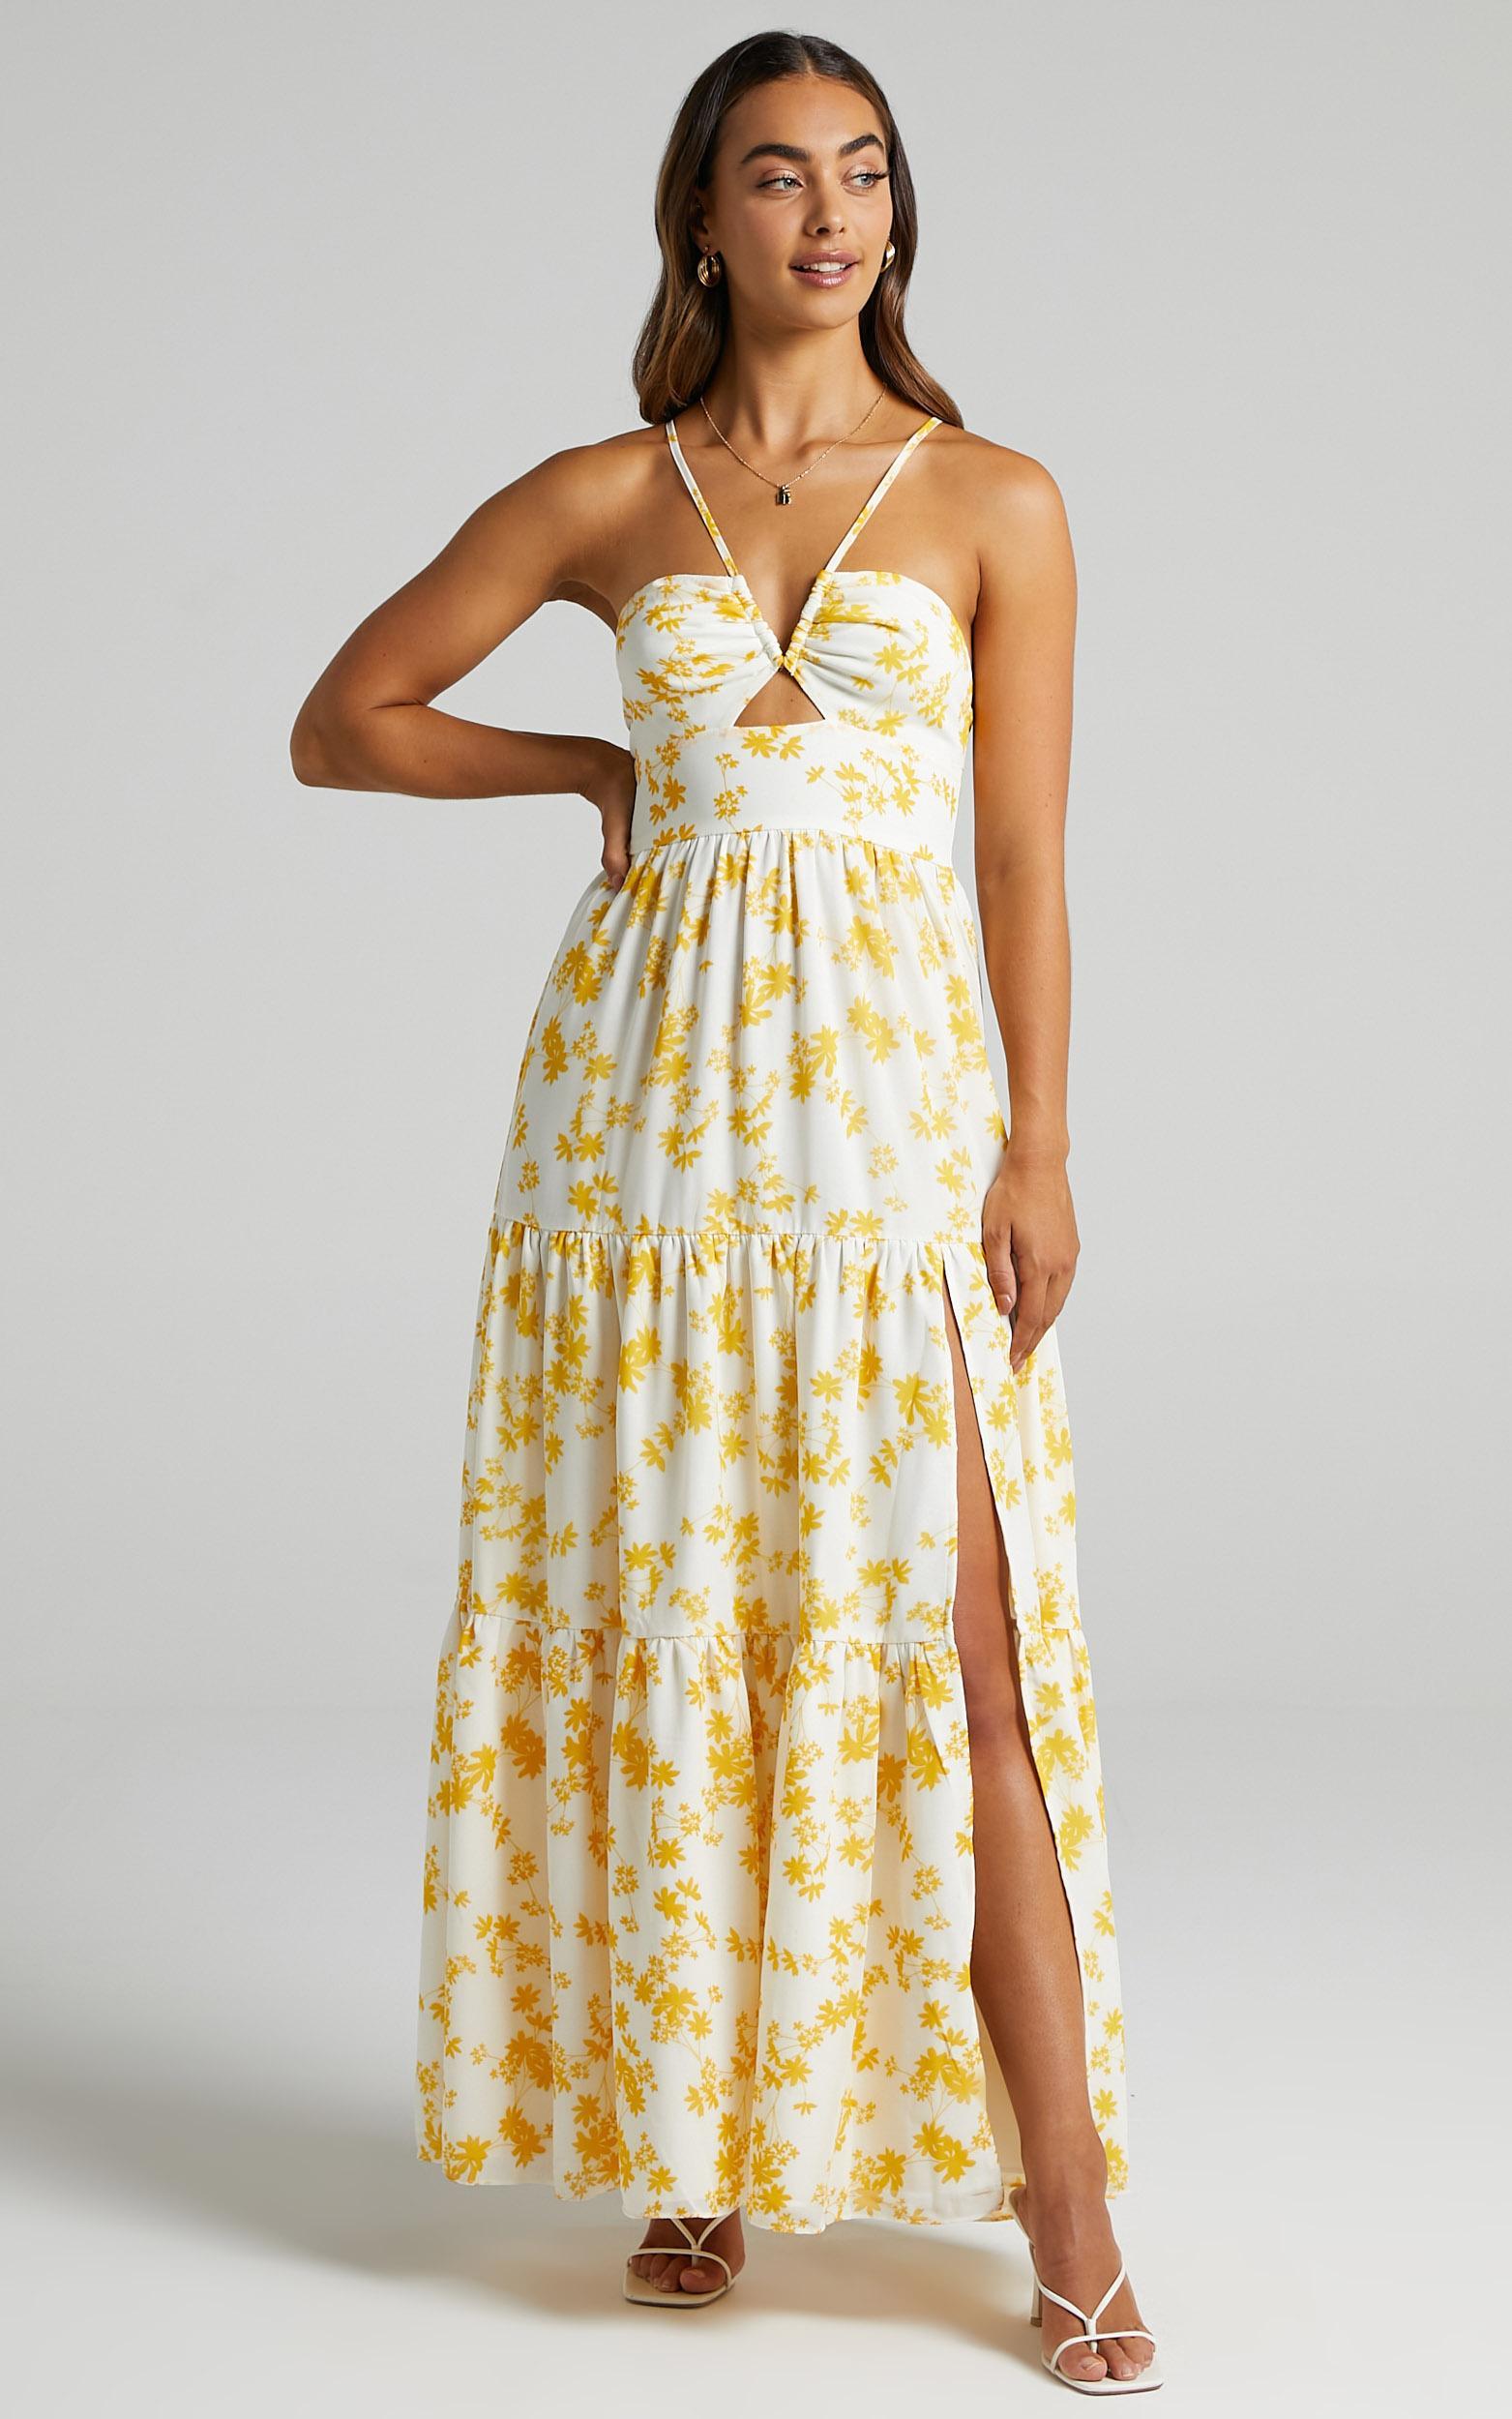 Kahrissa Strappy Maxi Dress in Yellow Floral - 06, YEL1, hi-res image number null